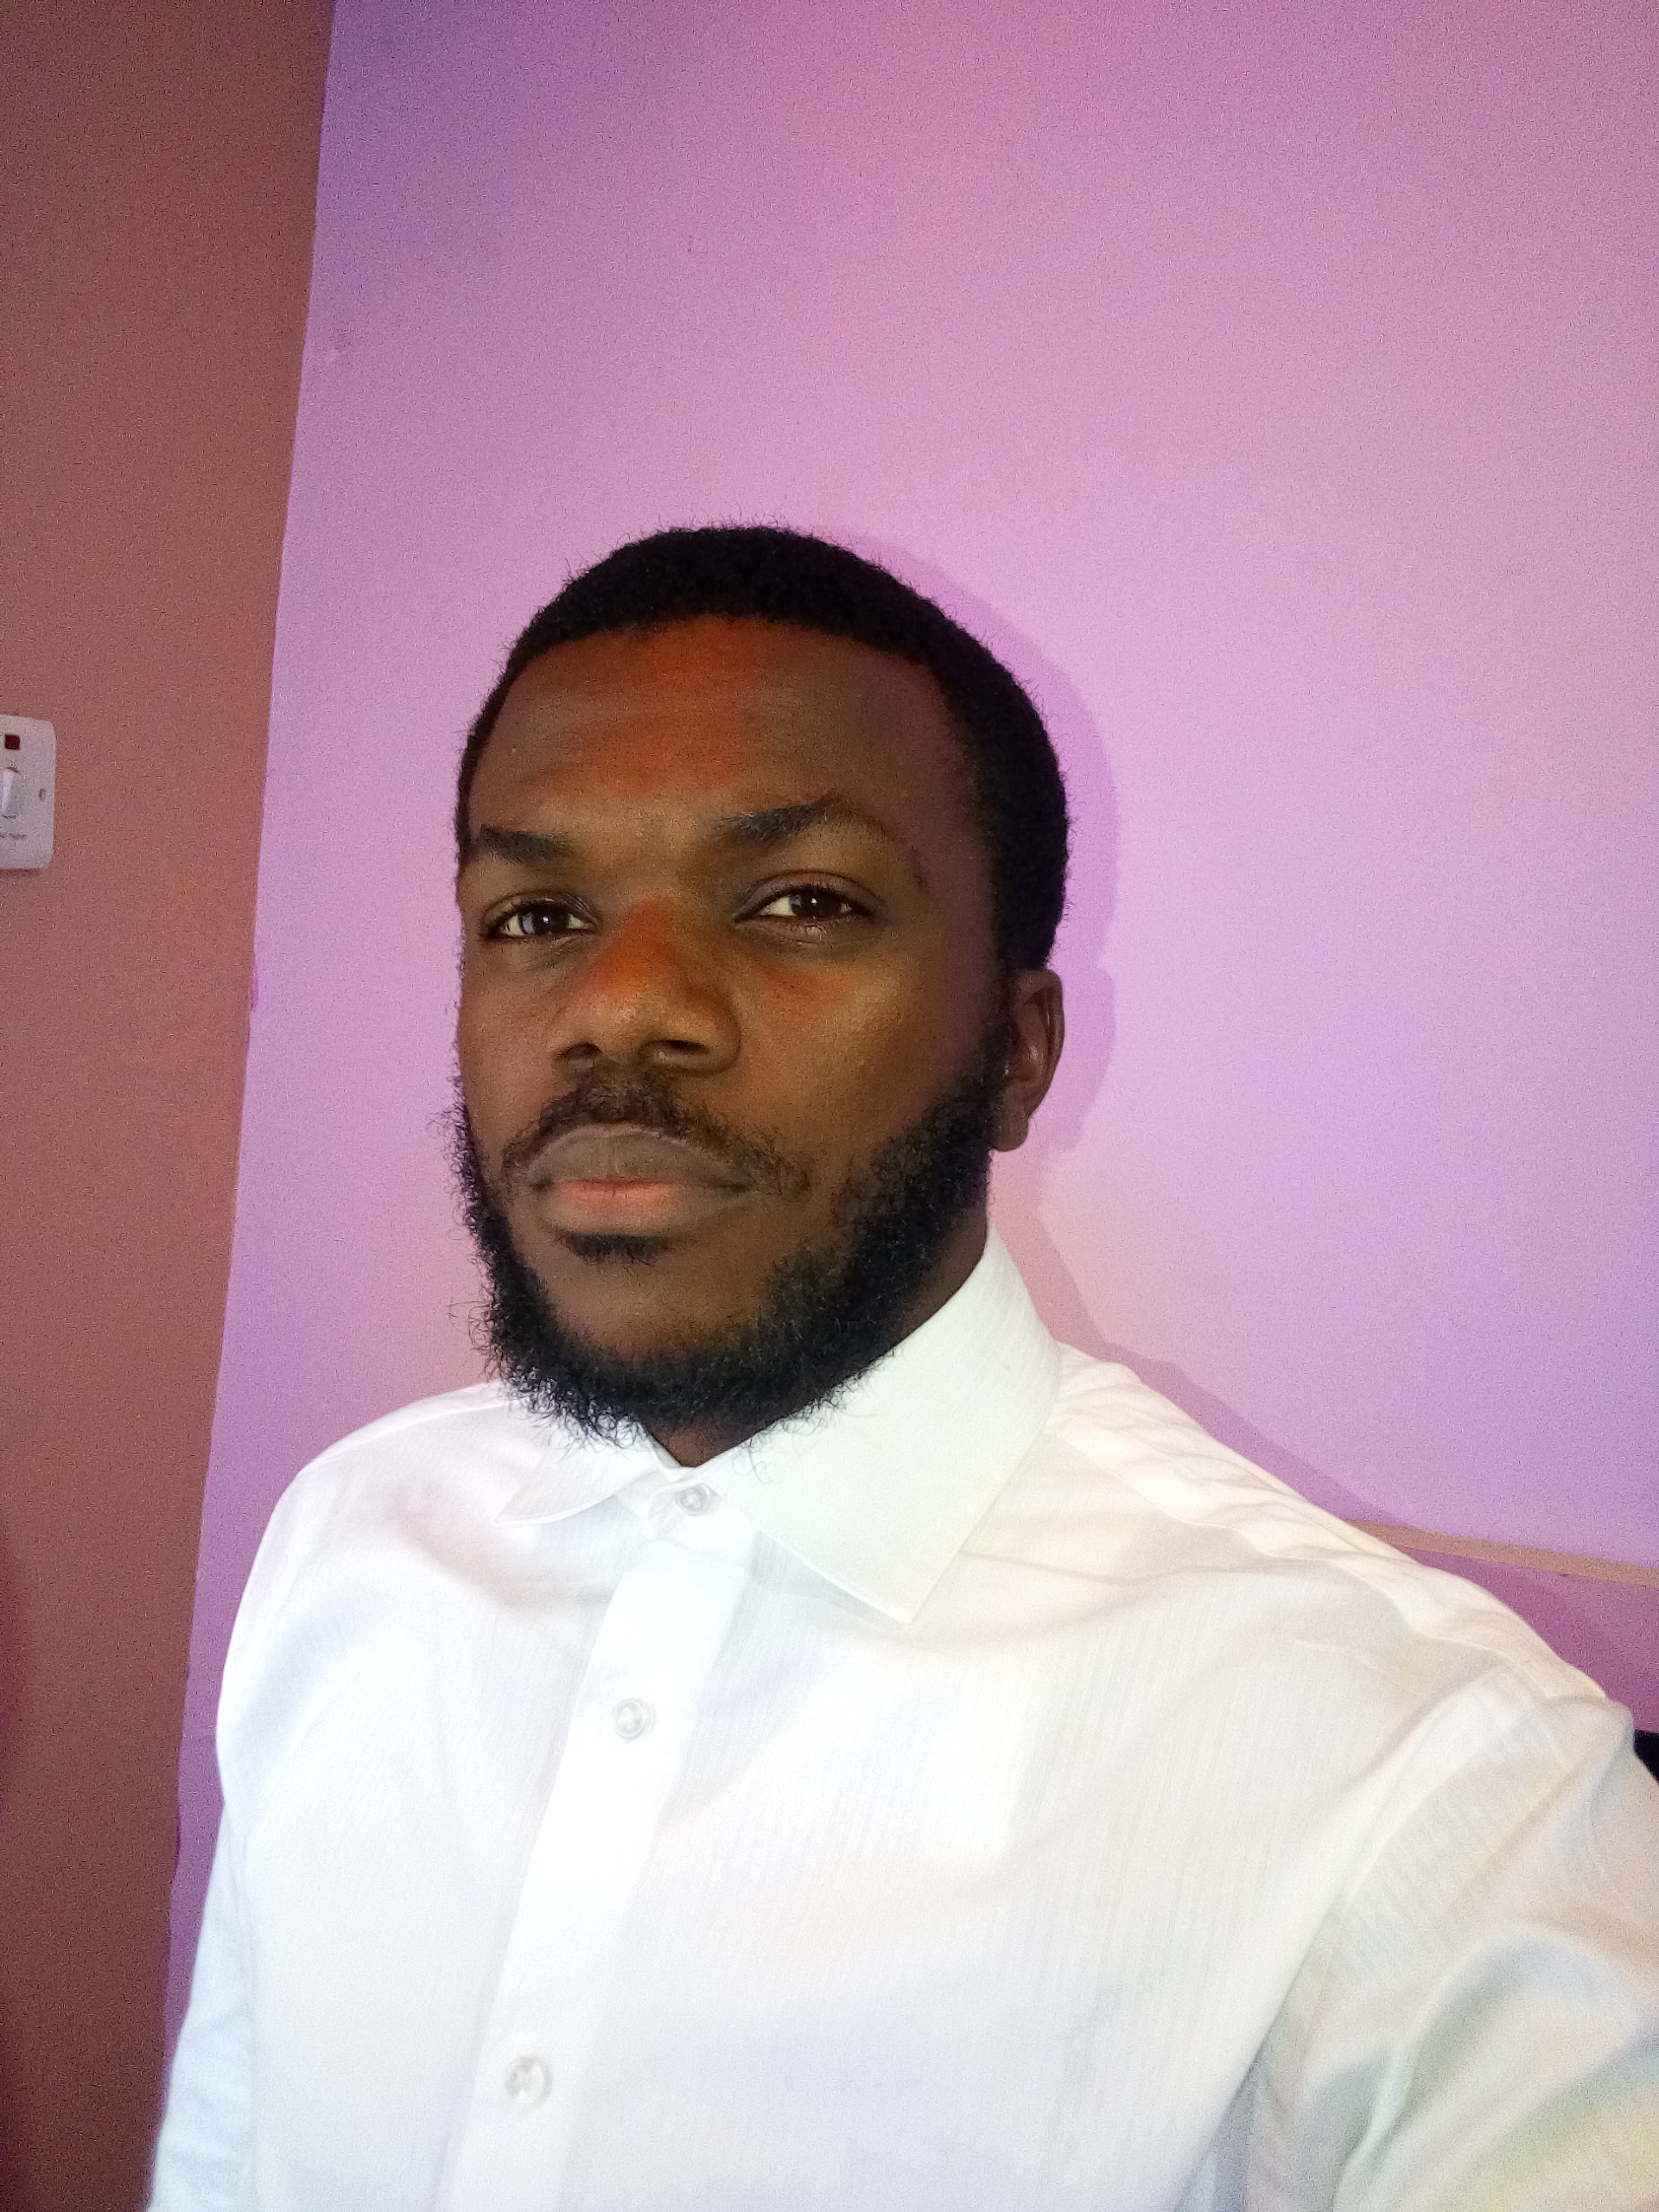 IMG 20180818 100129 - Indigenous Game Developer "Edu Shola" and How he Builds Nigerian Games